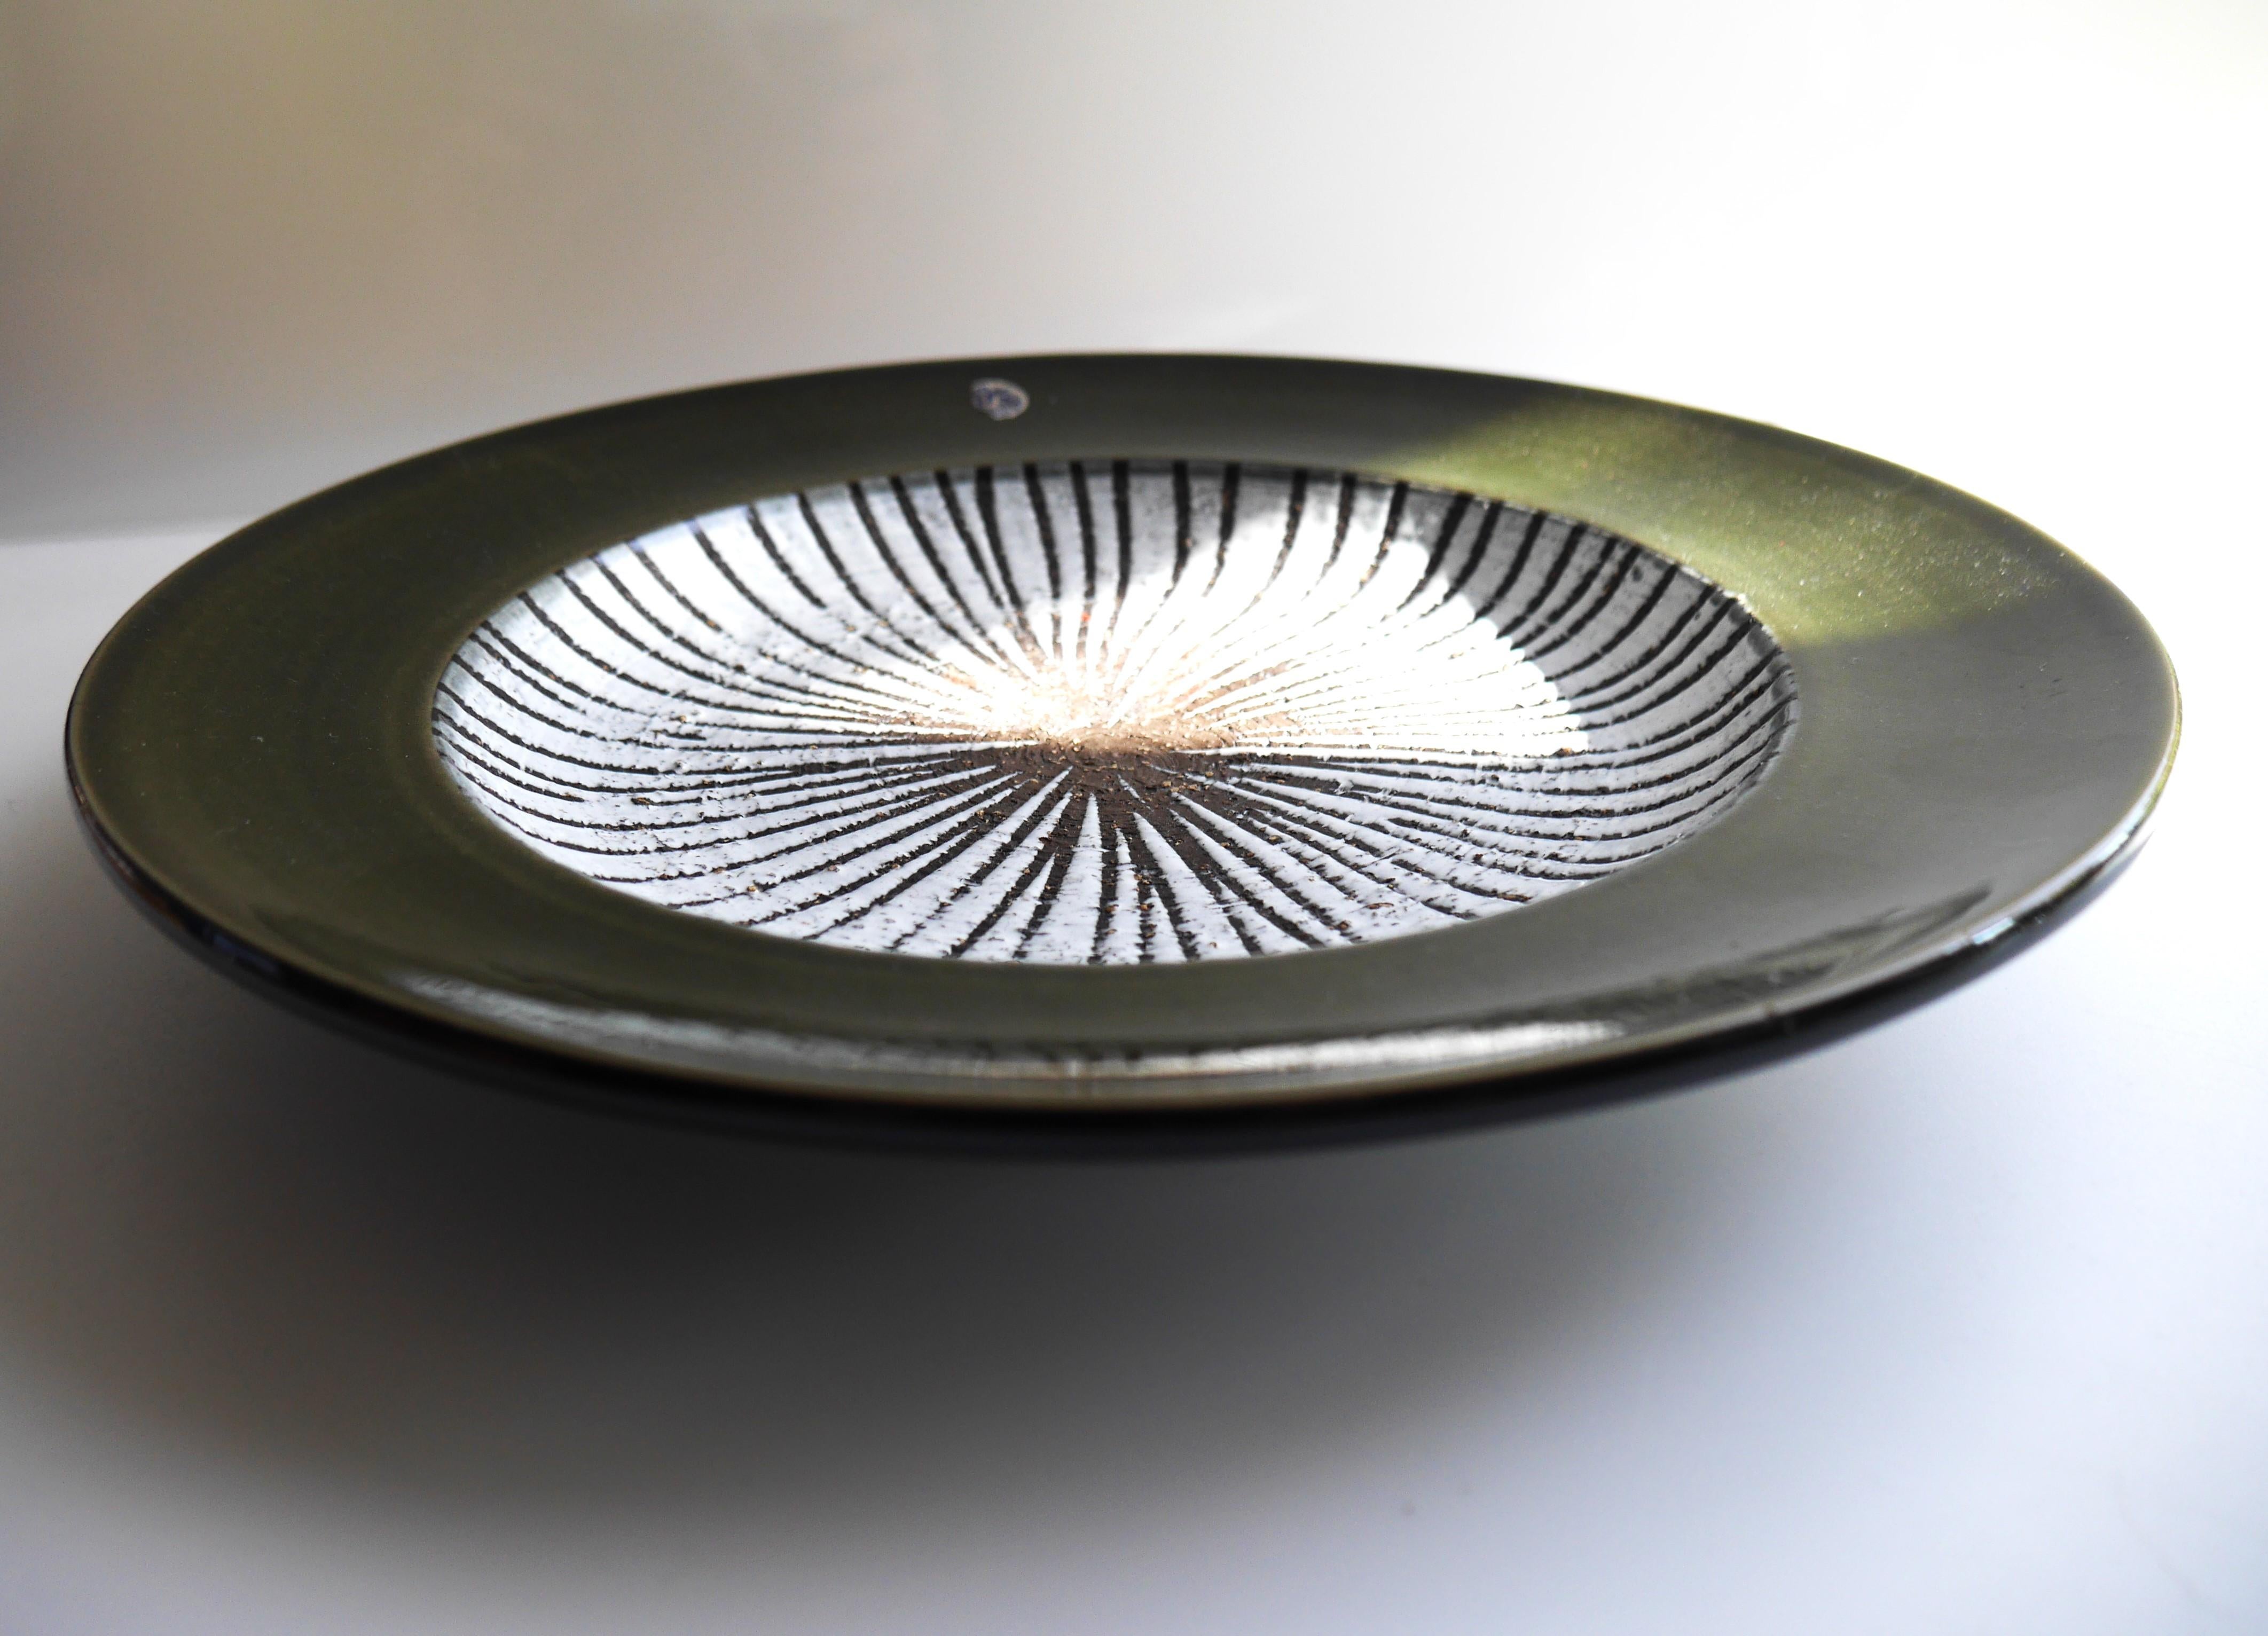 Mid-20th Century 'Cleo' bowl or plate by Mari Simmulson for Upsala Ekeby, Sweden